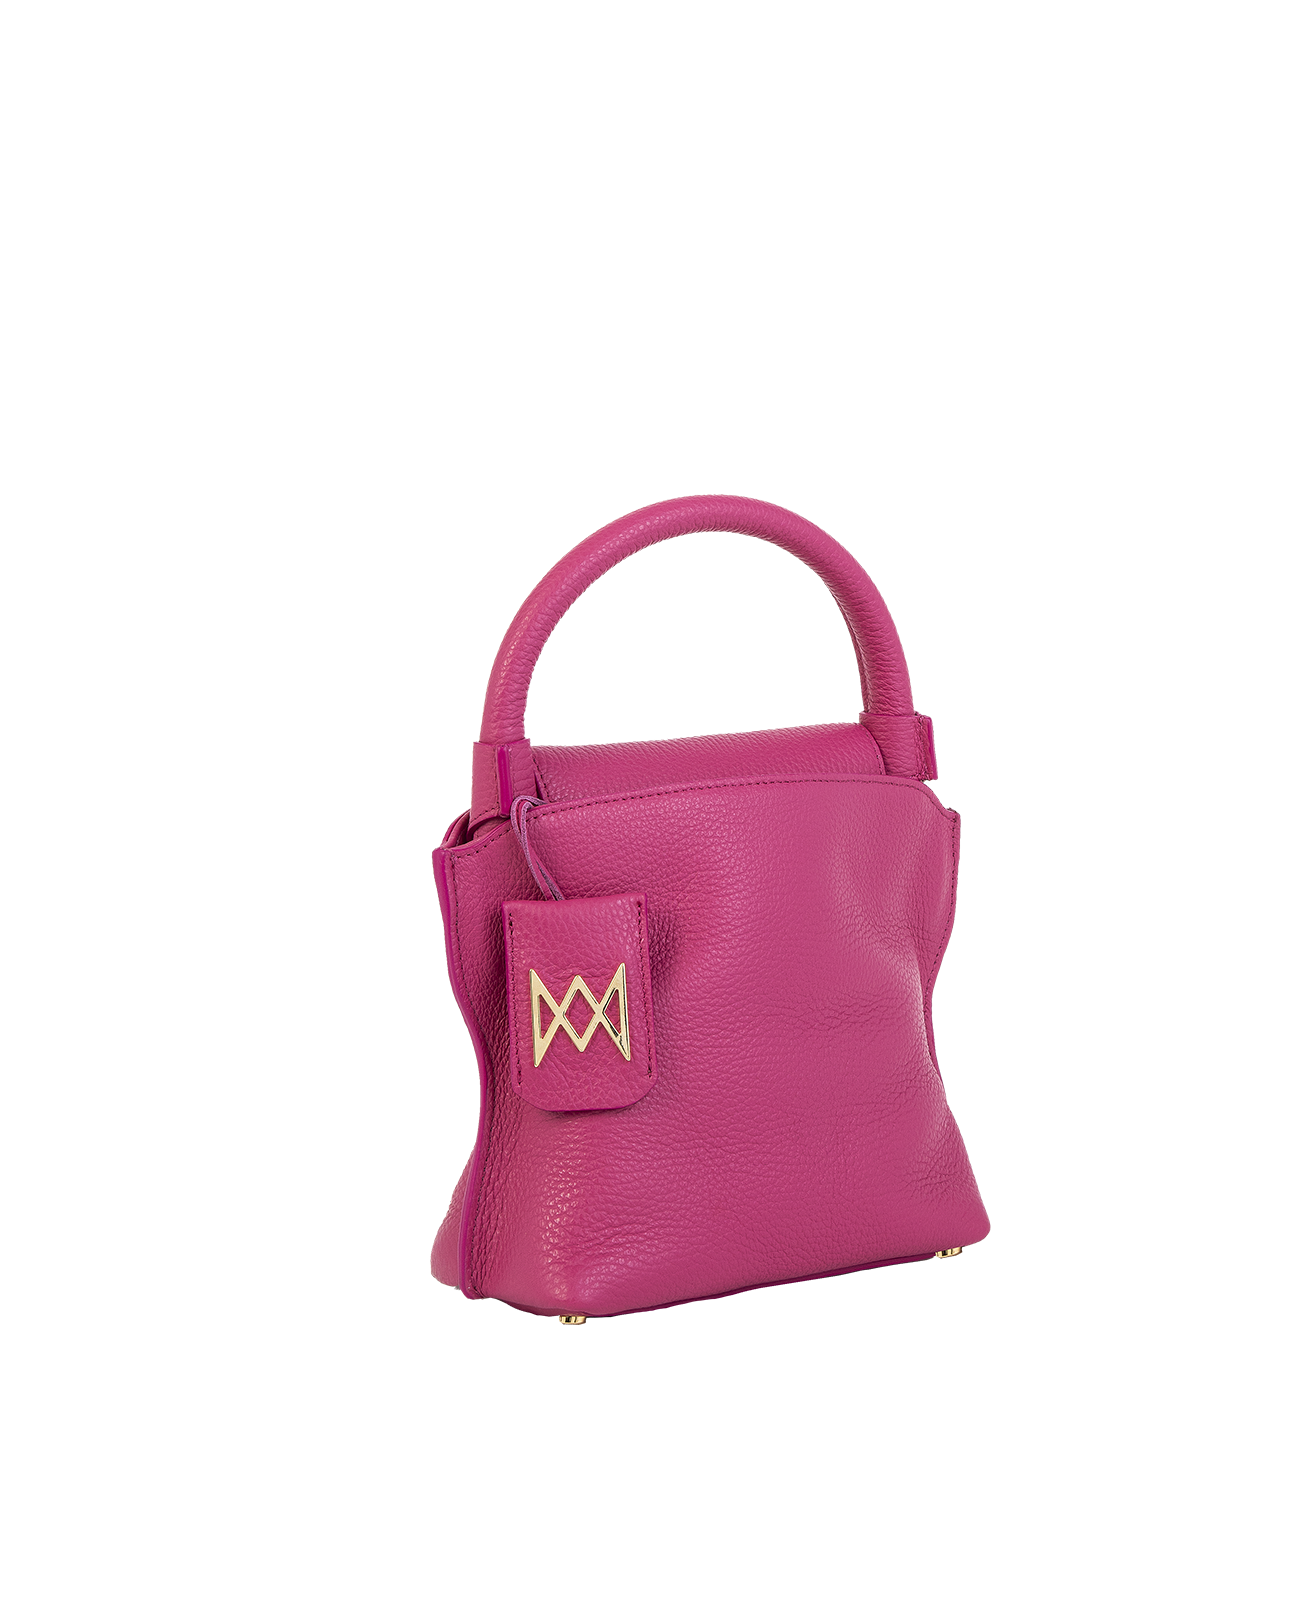 Cross-body bag in Italian full-grain leather, semi-aniline calf Italian leather with detachable shoulder strap.Three compartments, zip pocket in the back compartment. Magnetic flap closure with logo. Color: Pink. Size:Medium